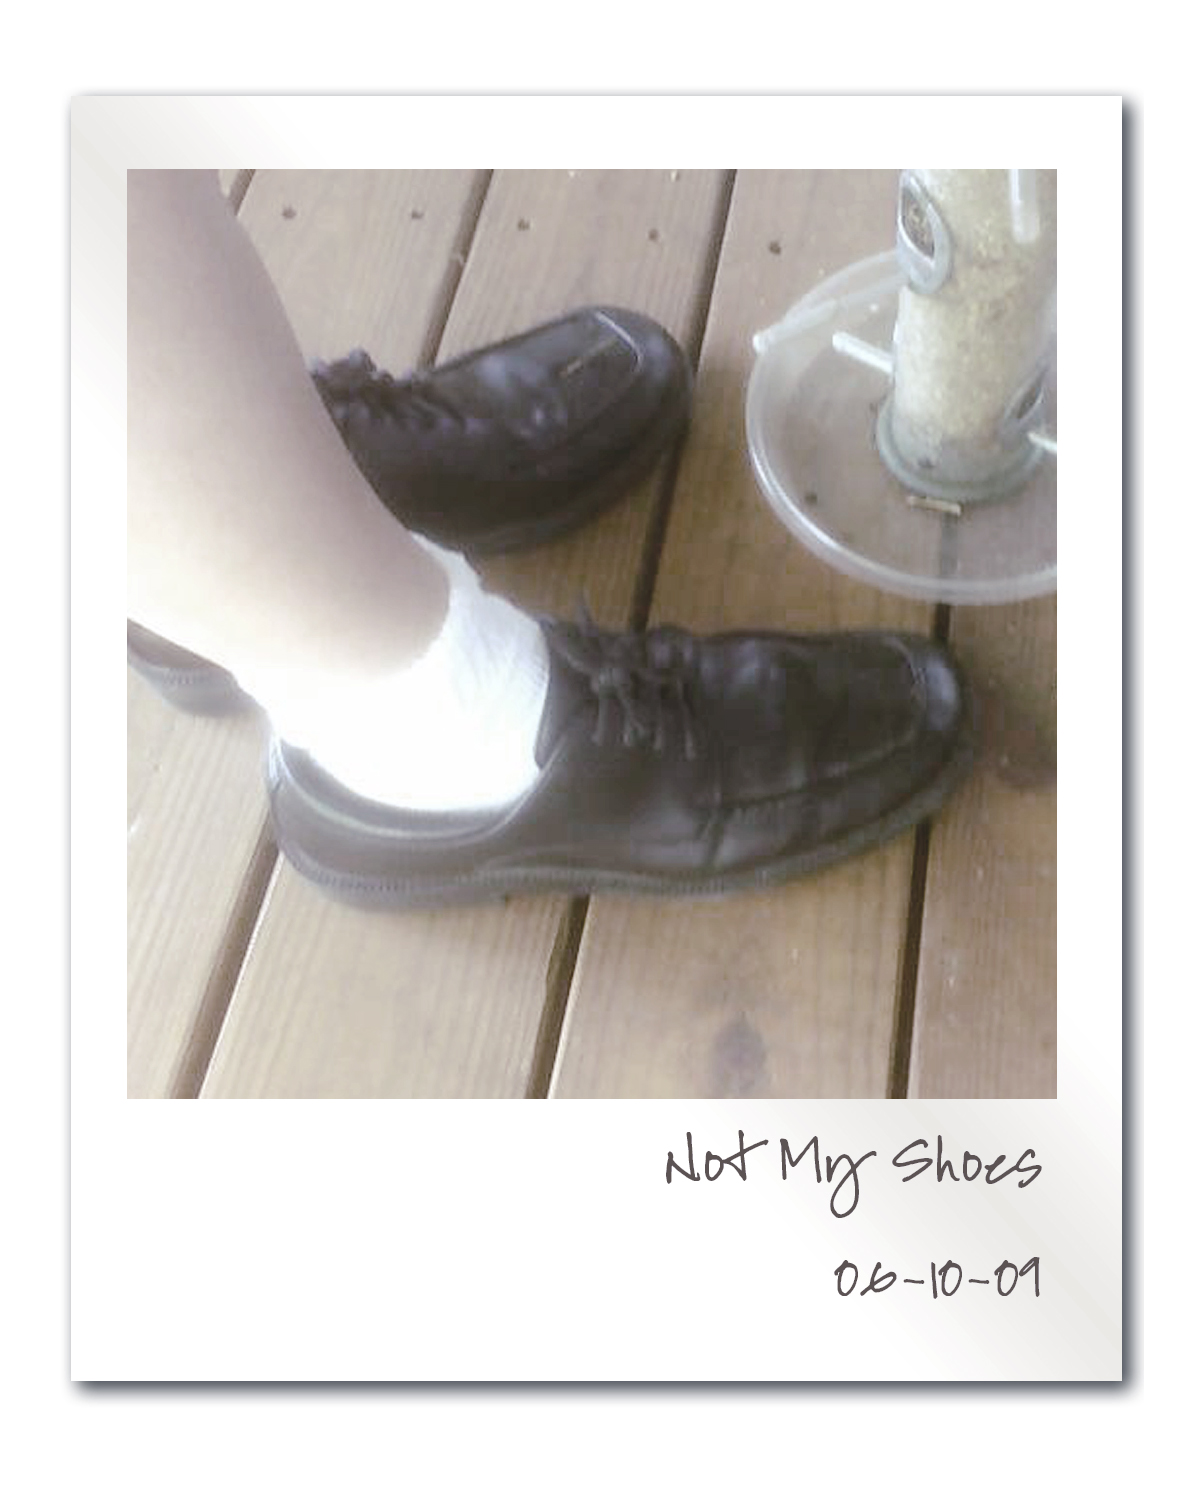 Not My Shoes - by Angela Josephine, blog post about authenticity, running